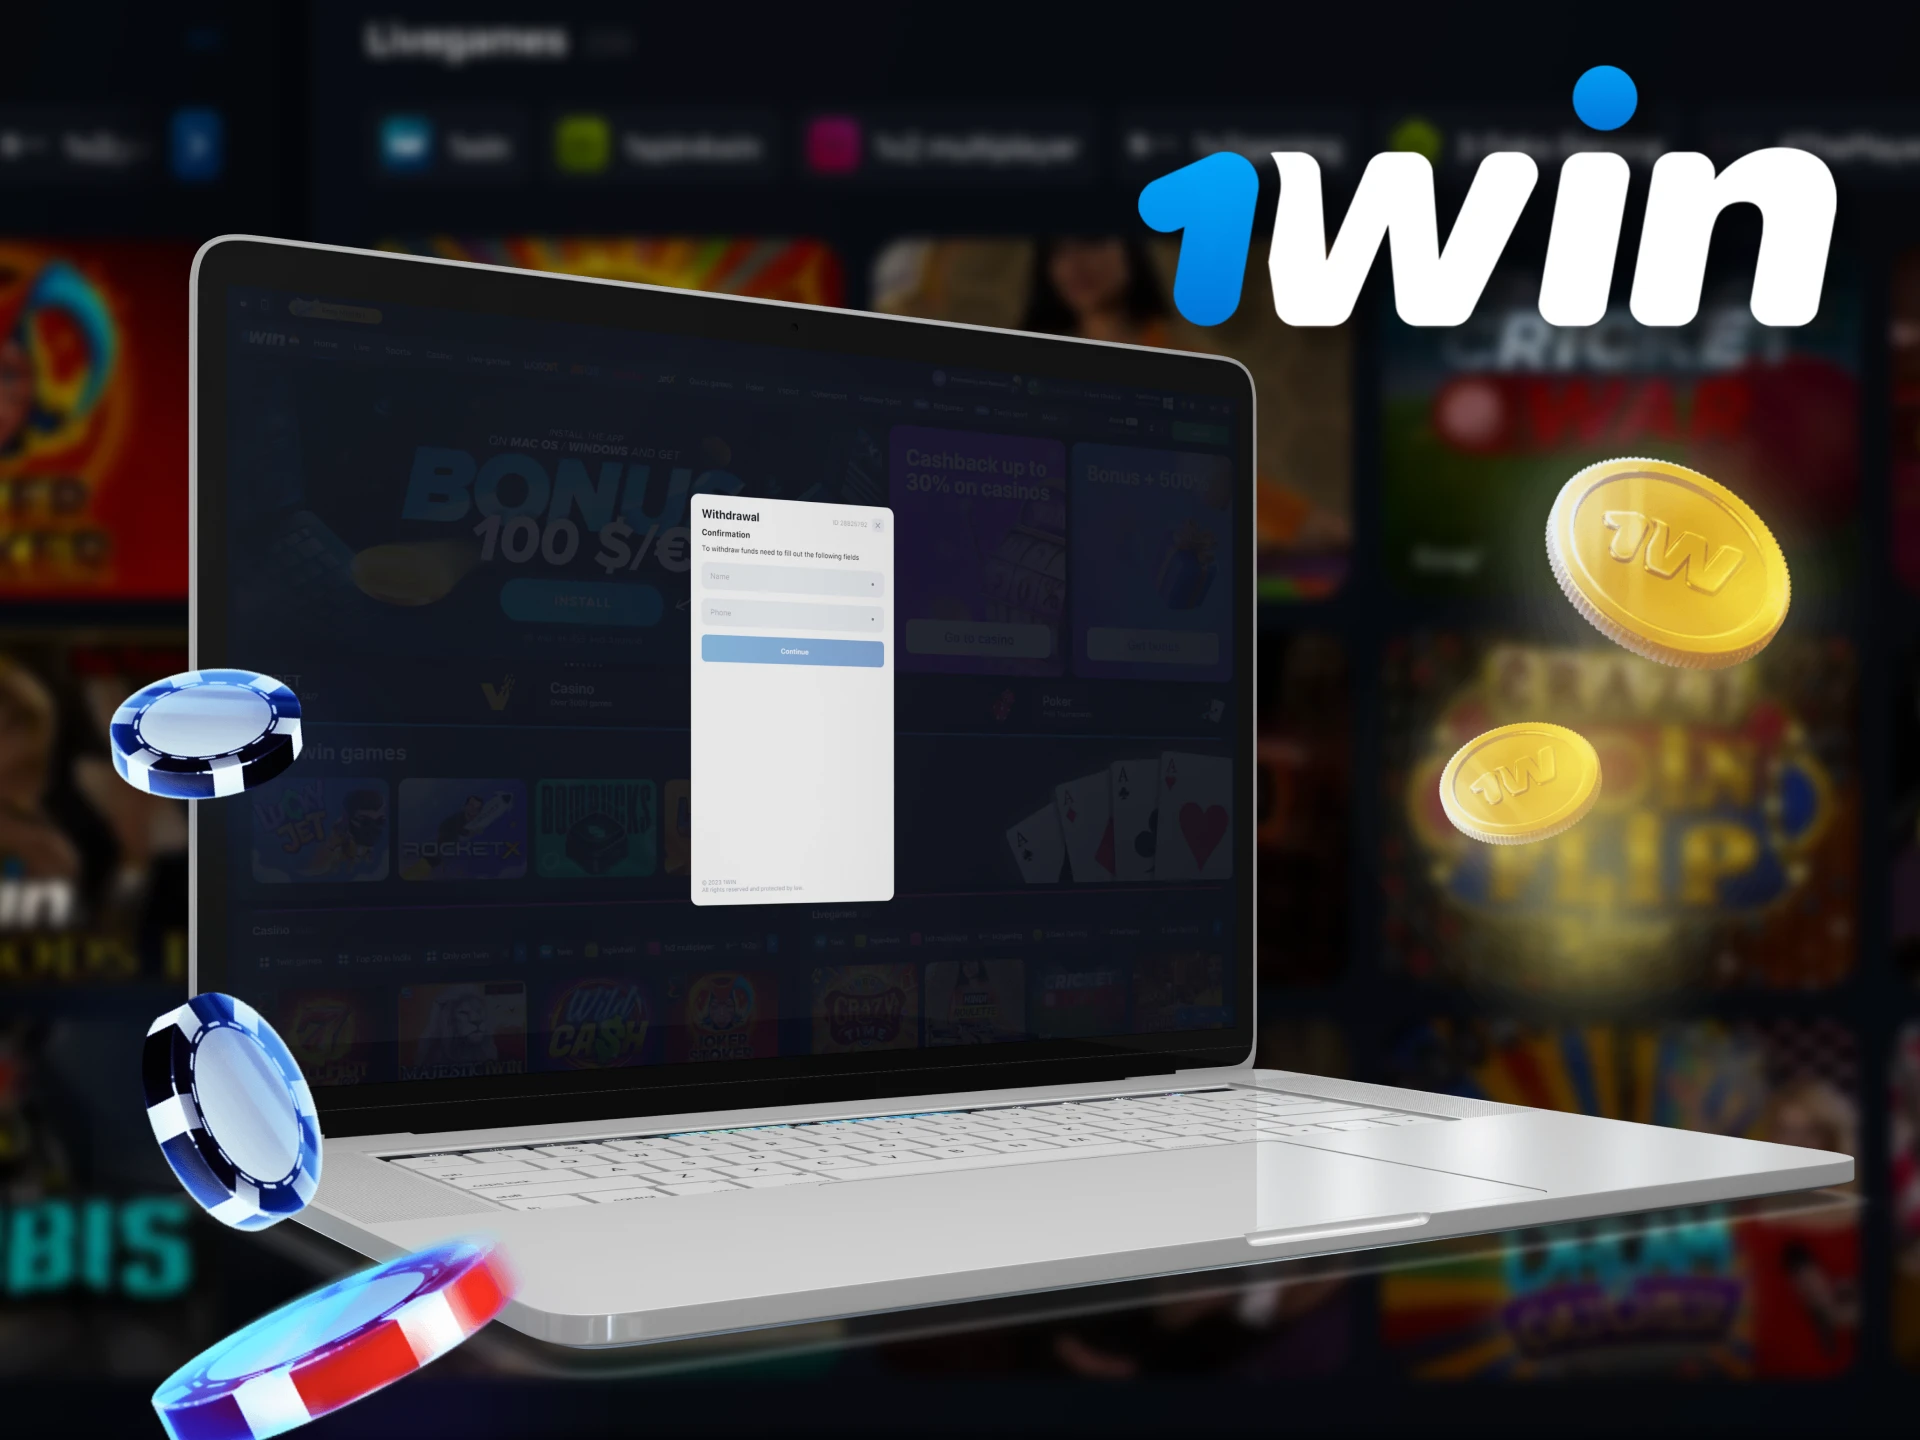 Confirm your identity through 1win verification and bet safely.